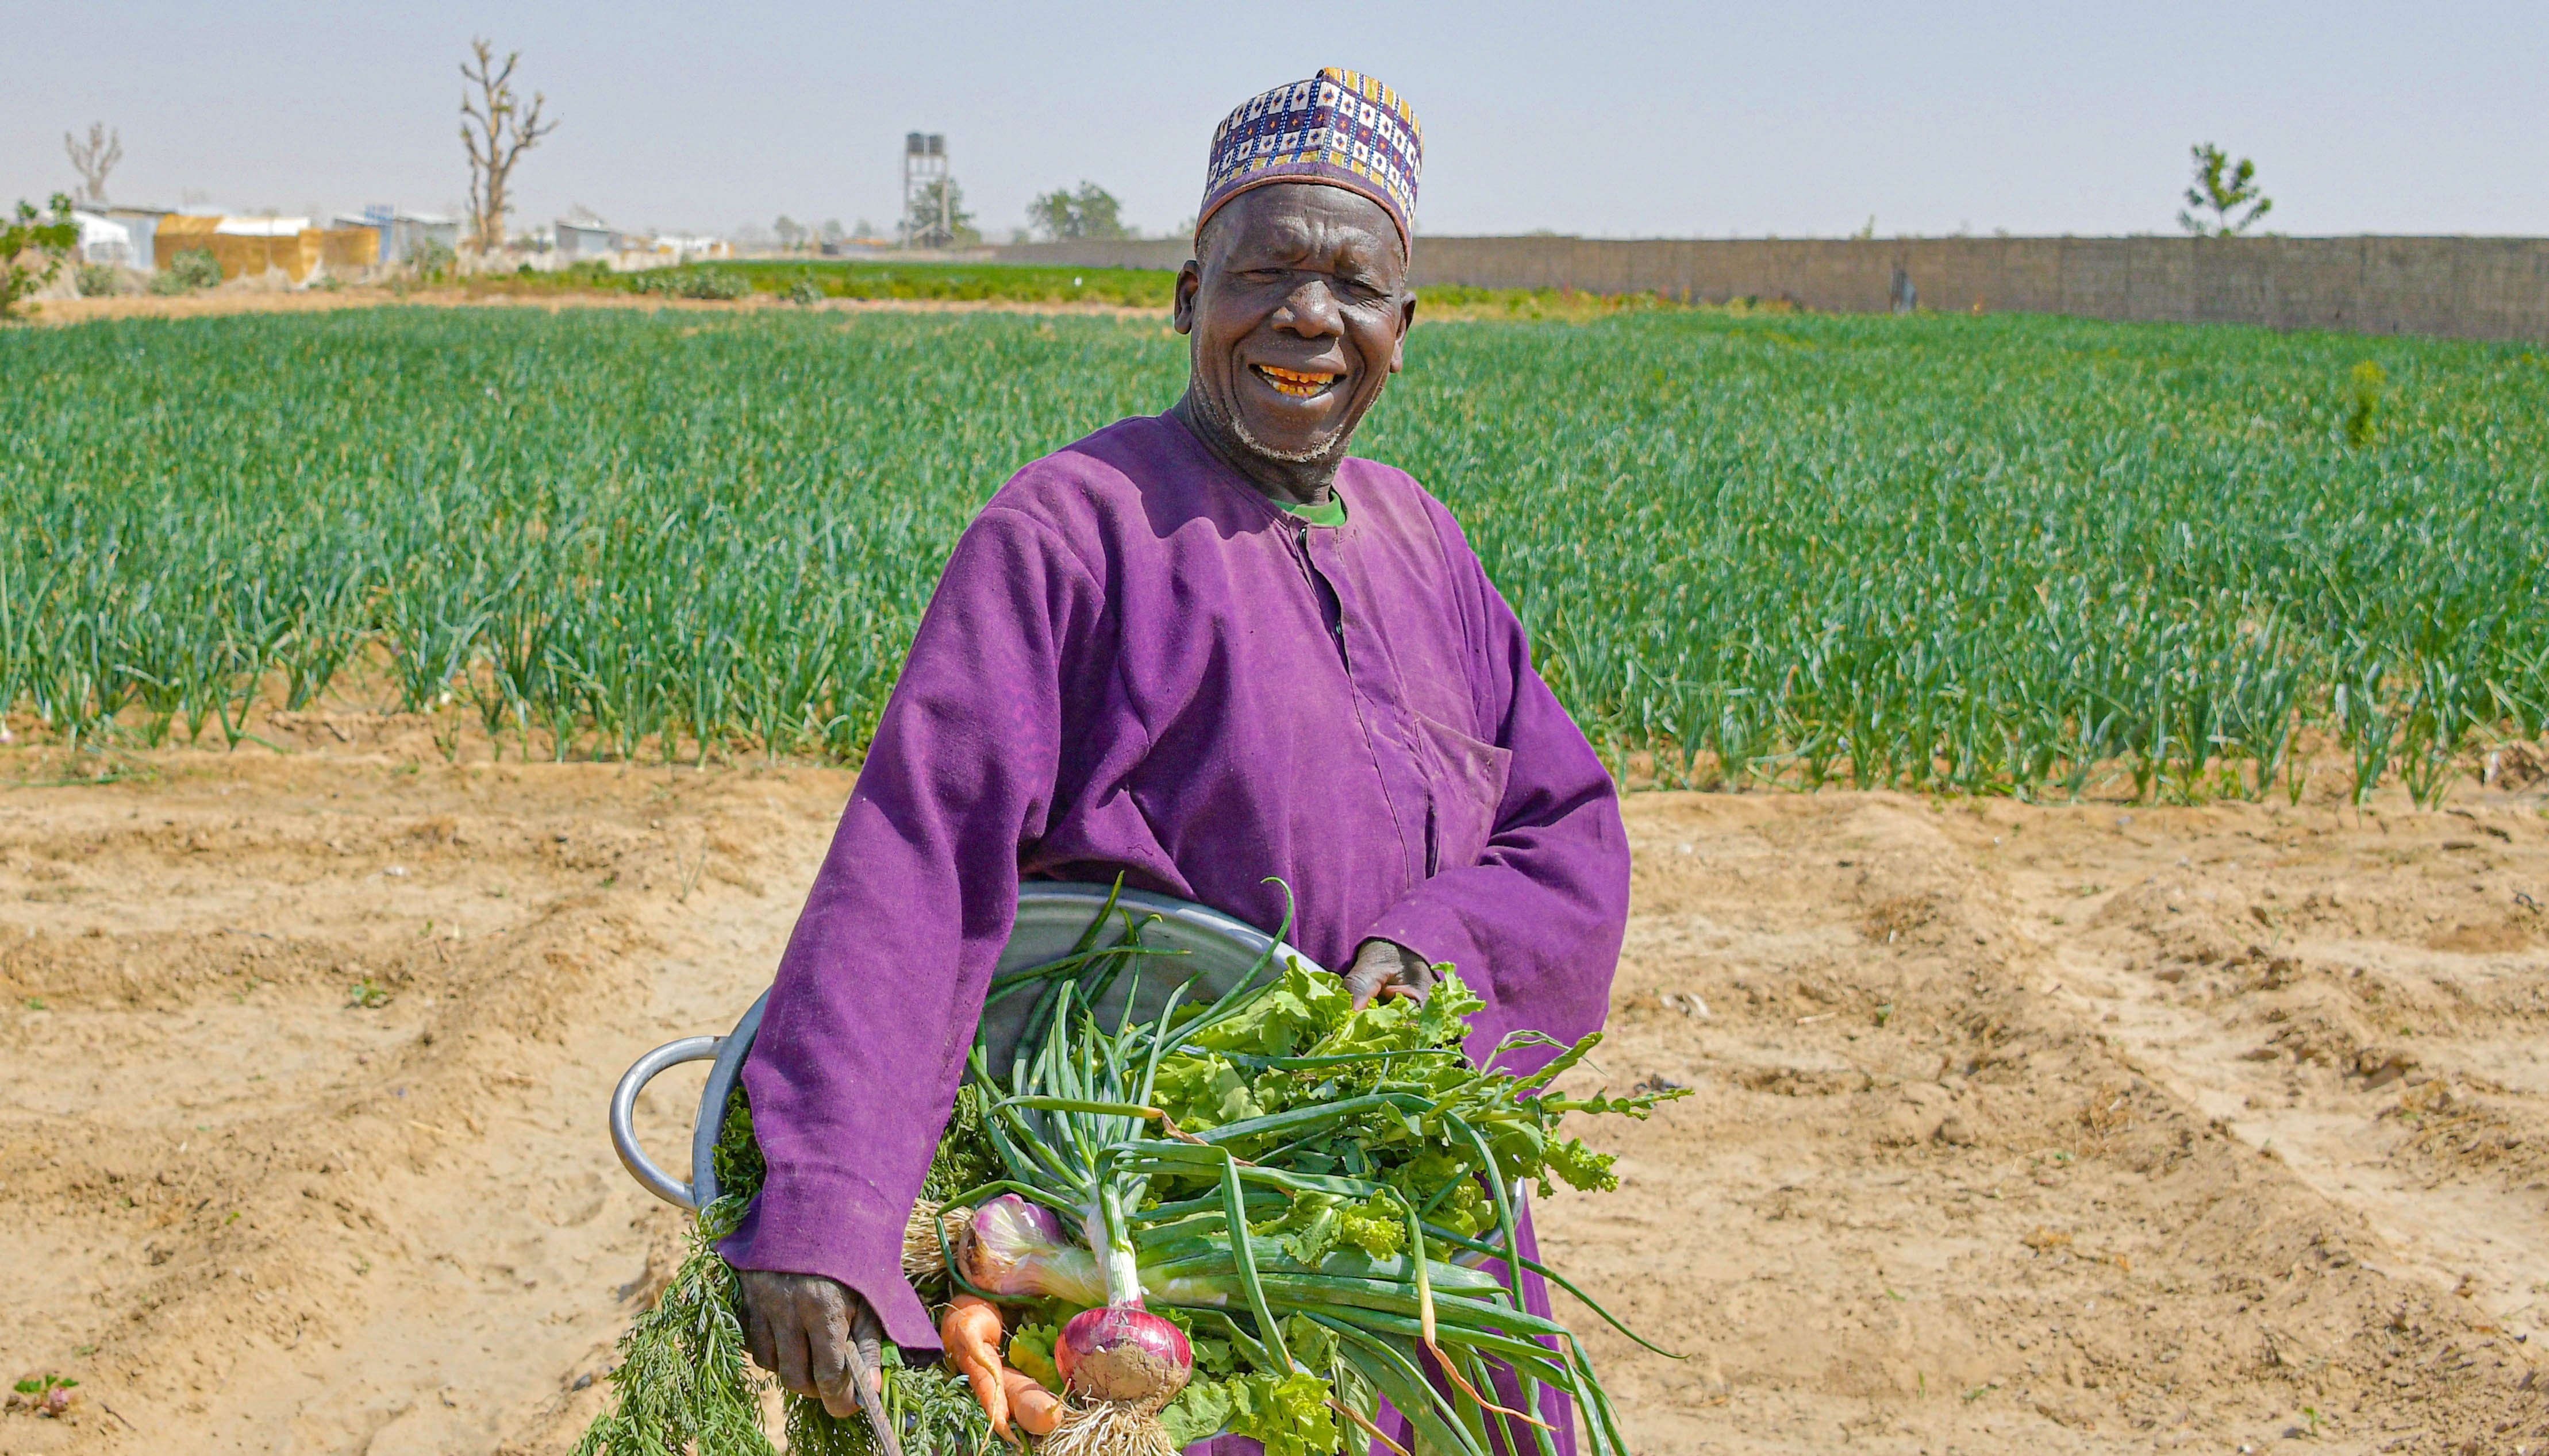 Read Enhancing local food production to improve livelihoods and food security. by UNDP NIGERIA